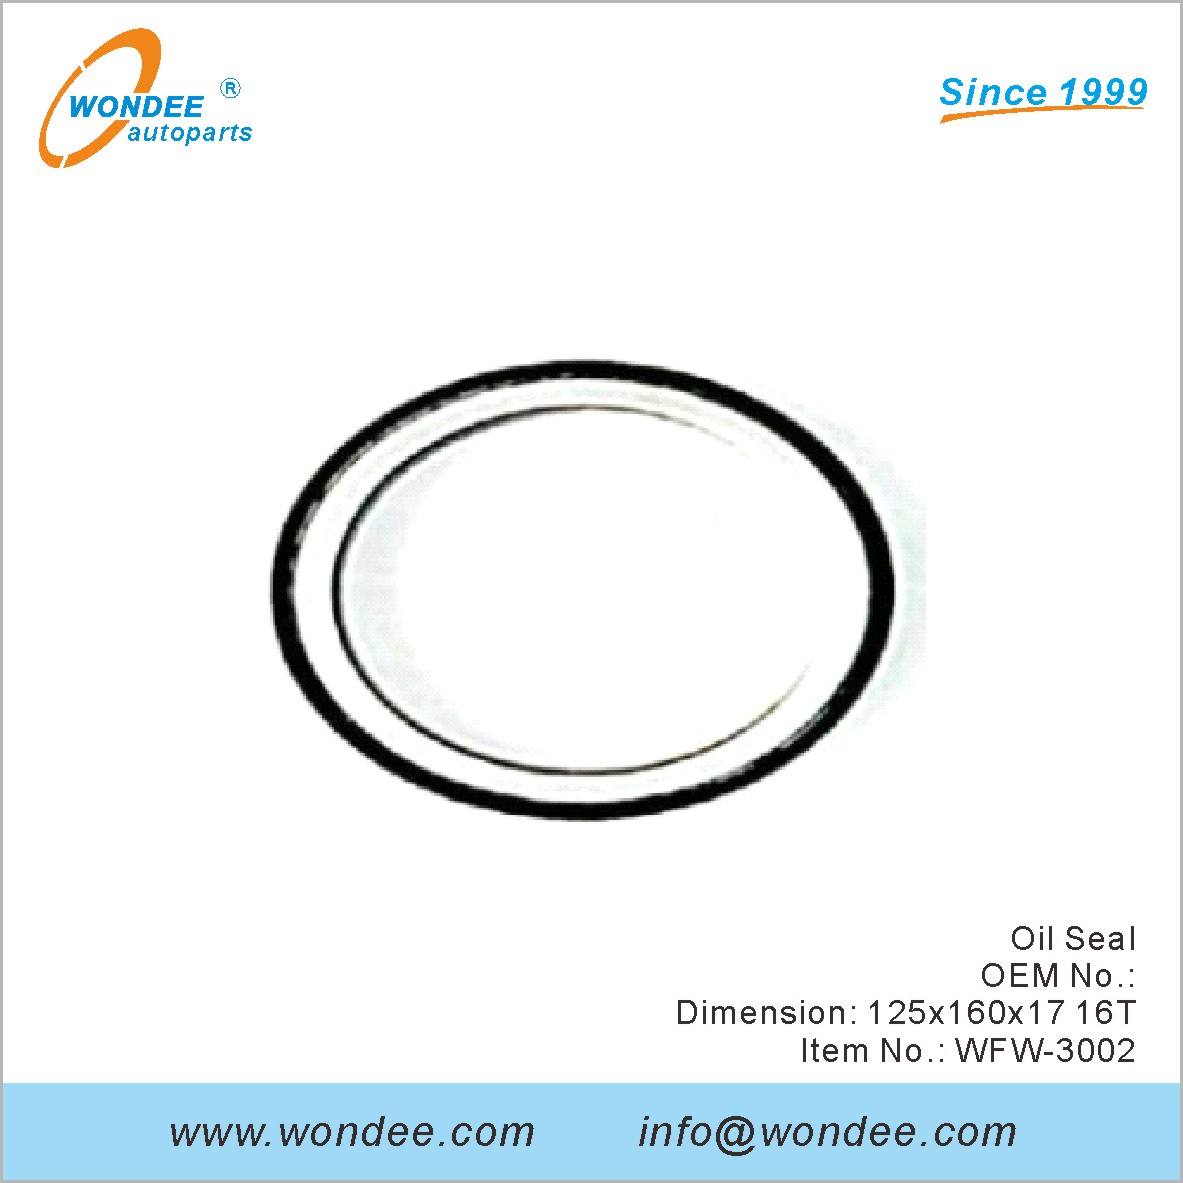 Oil Seal OEM for FUWA from WONDEE (2)